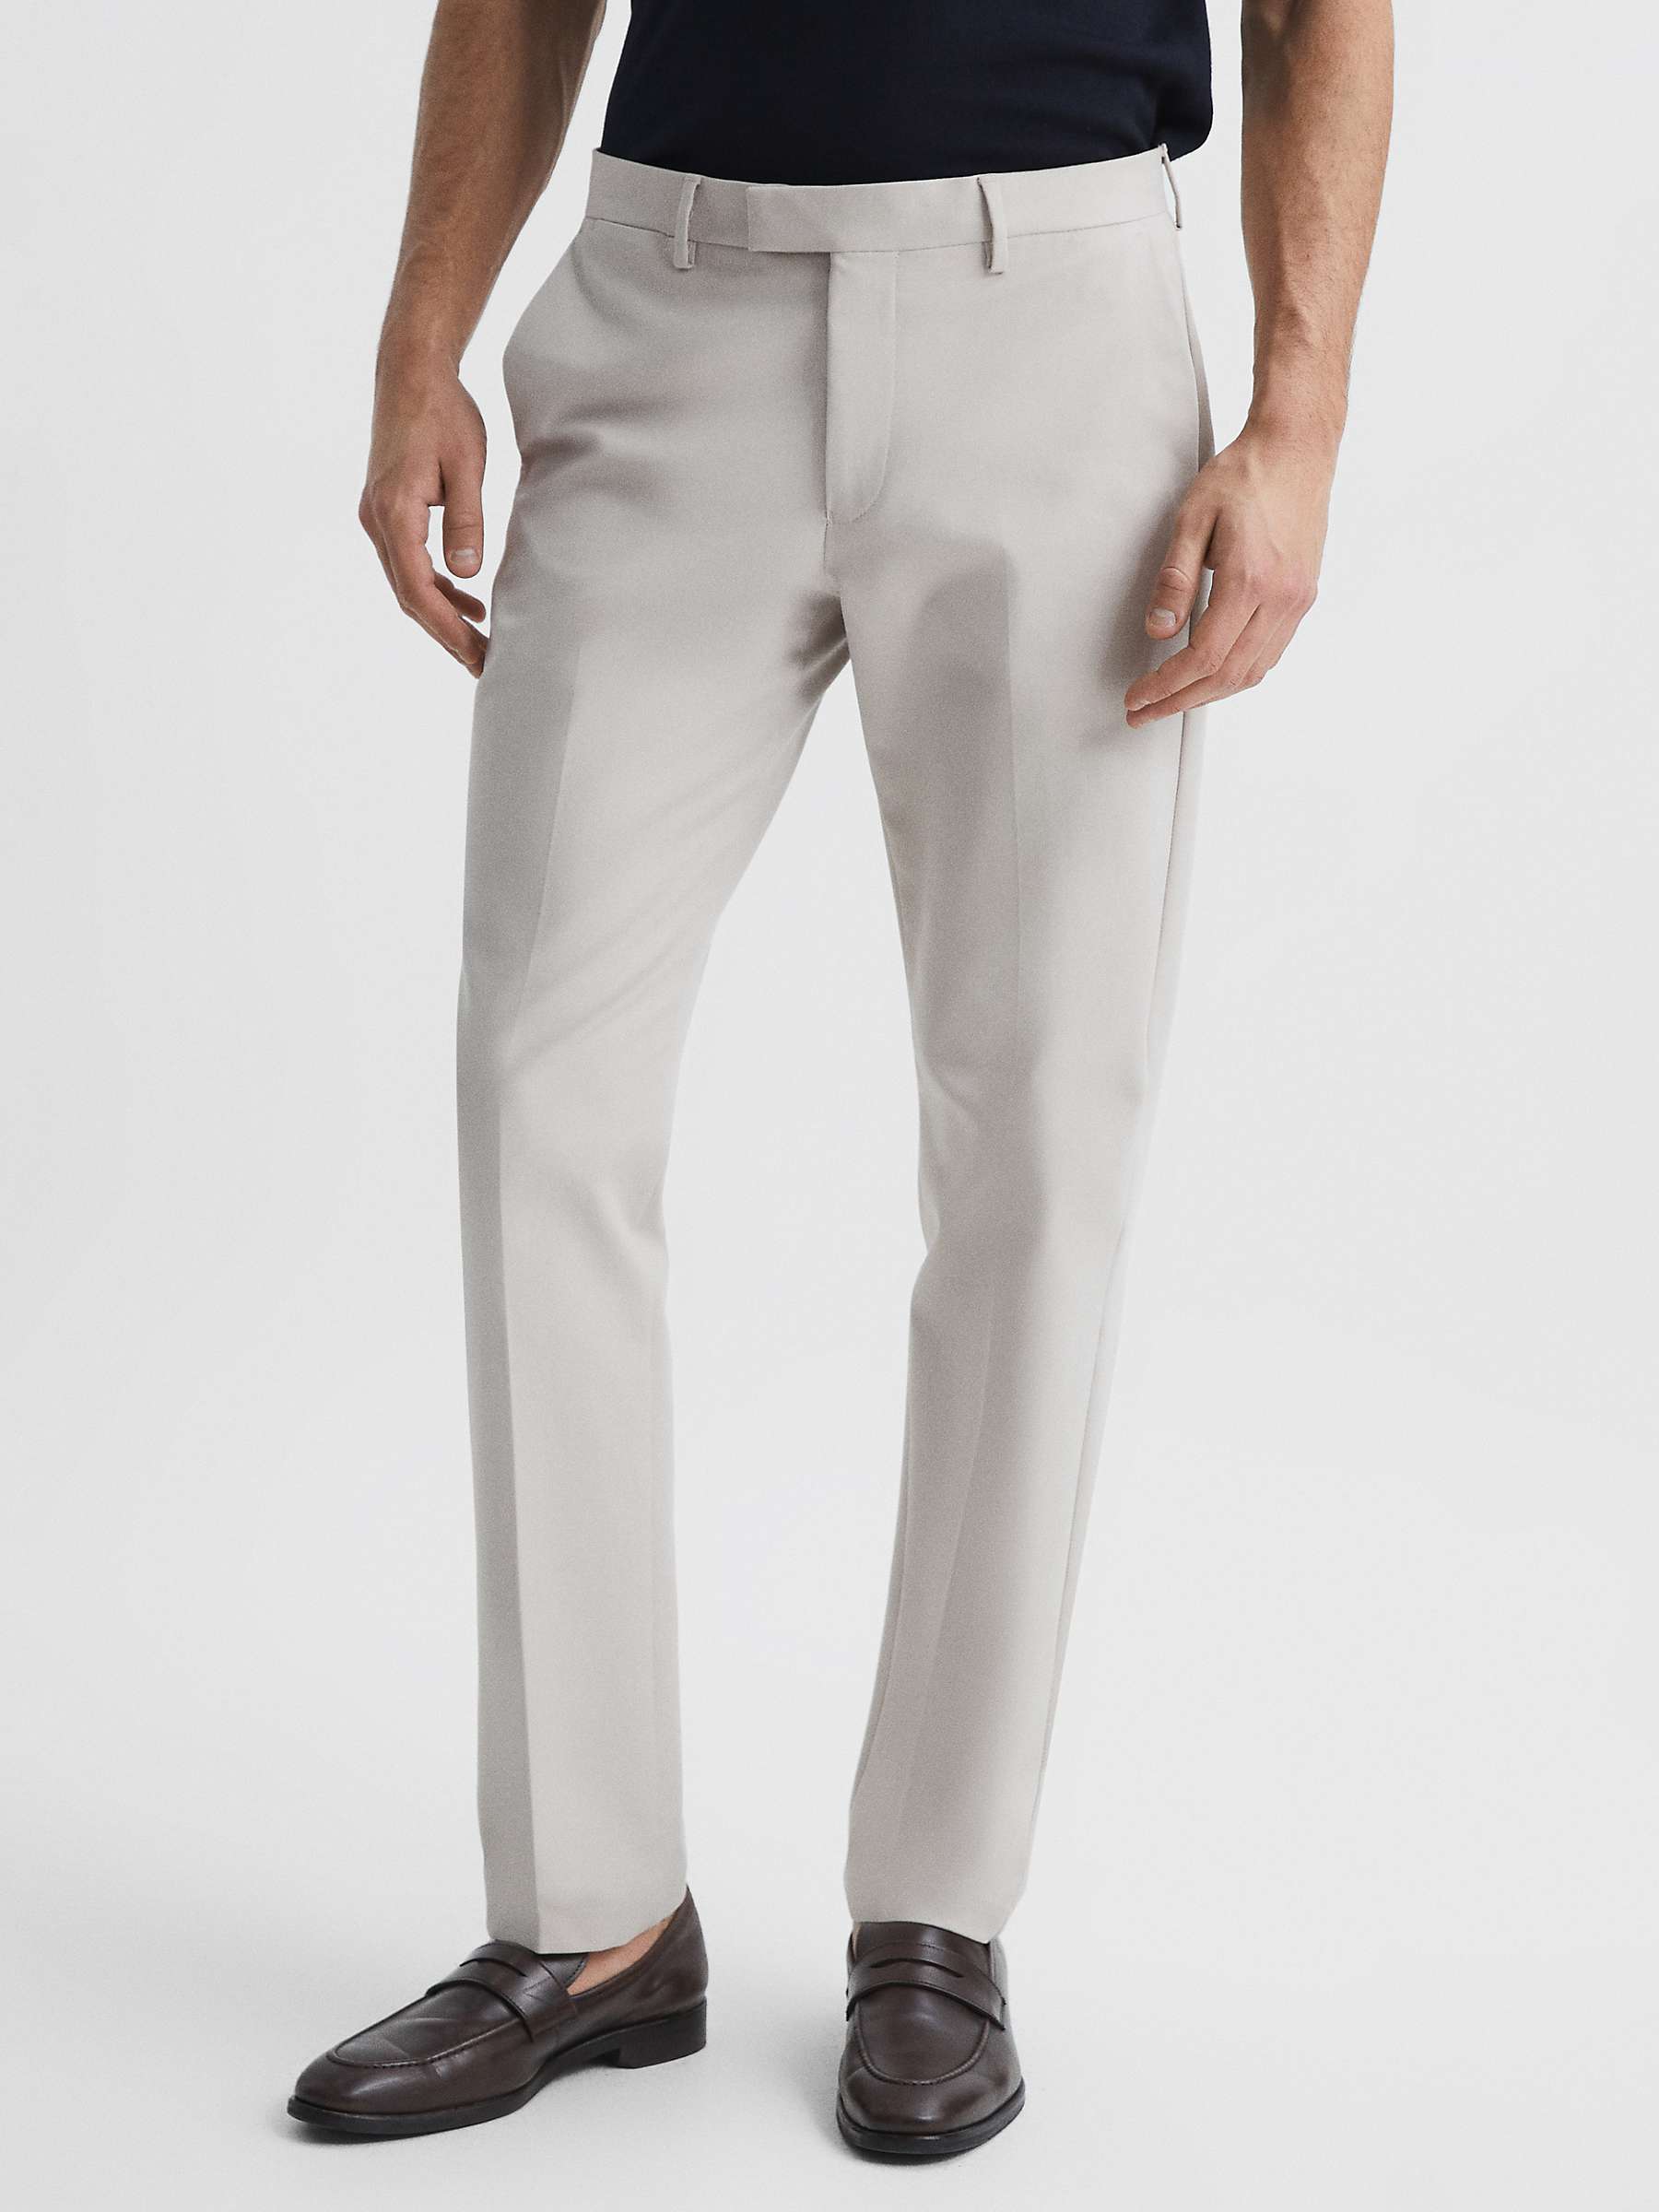 Buy Reiss Eastbury Slim Fit Cotton Blend Chino Trousers Online at johnlewis.com